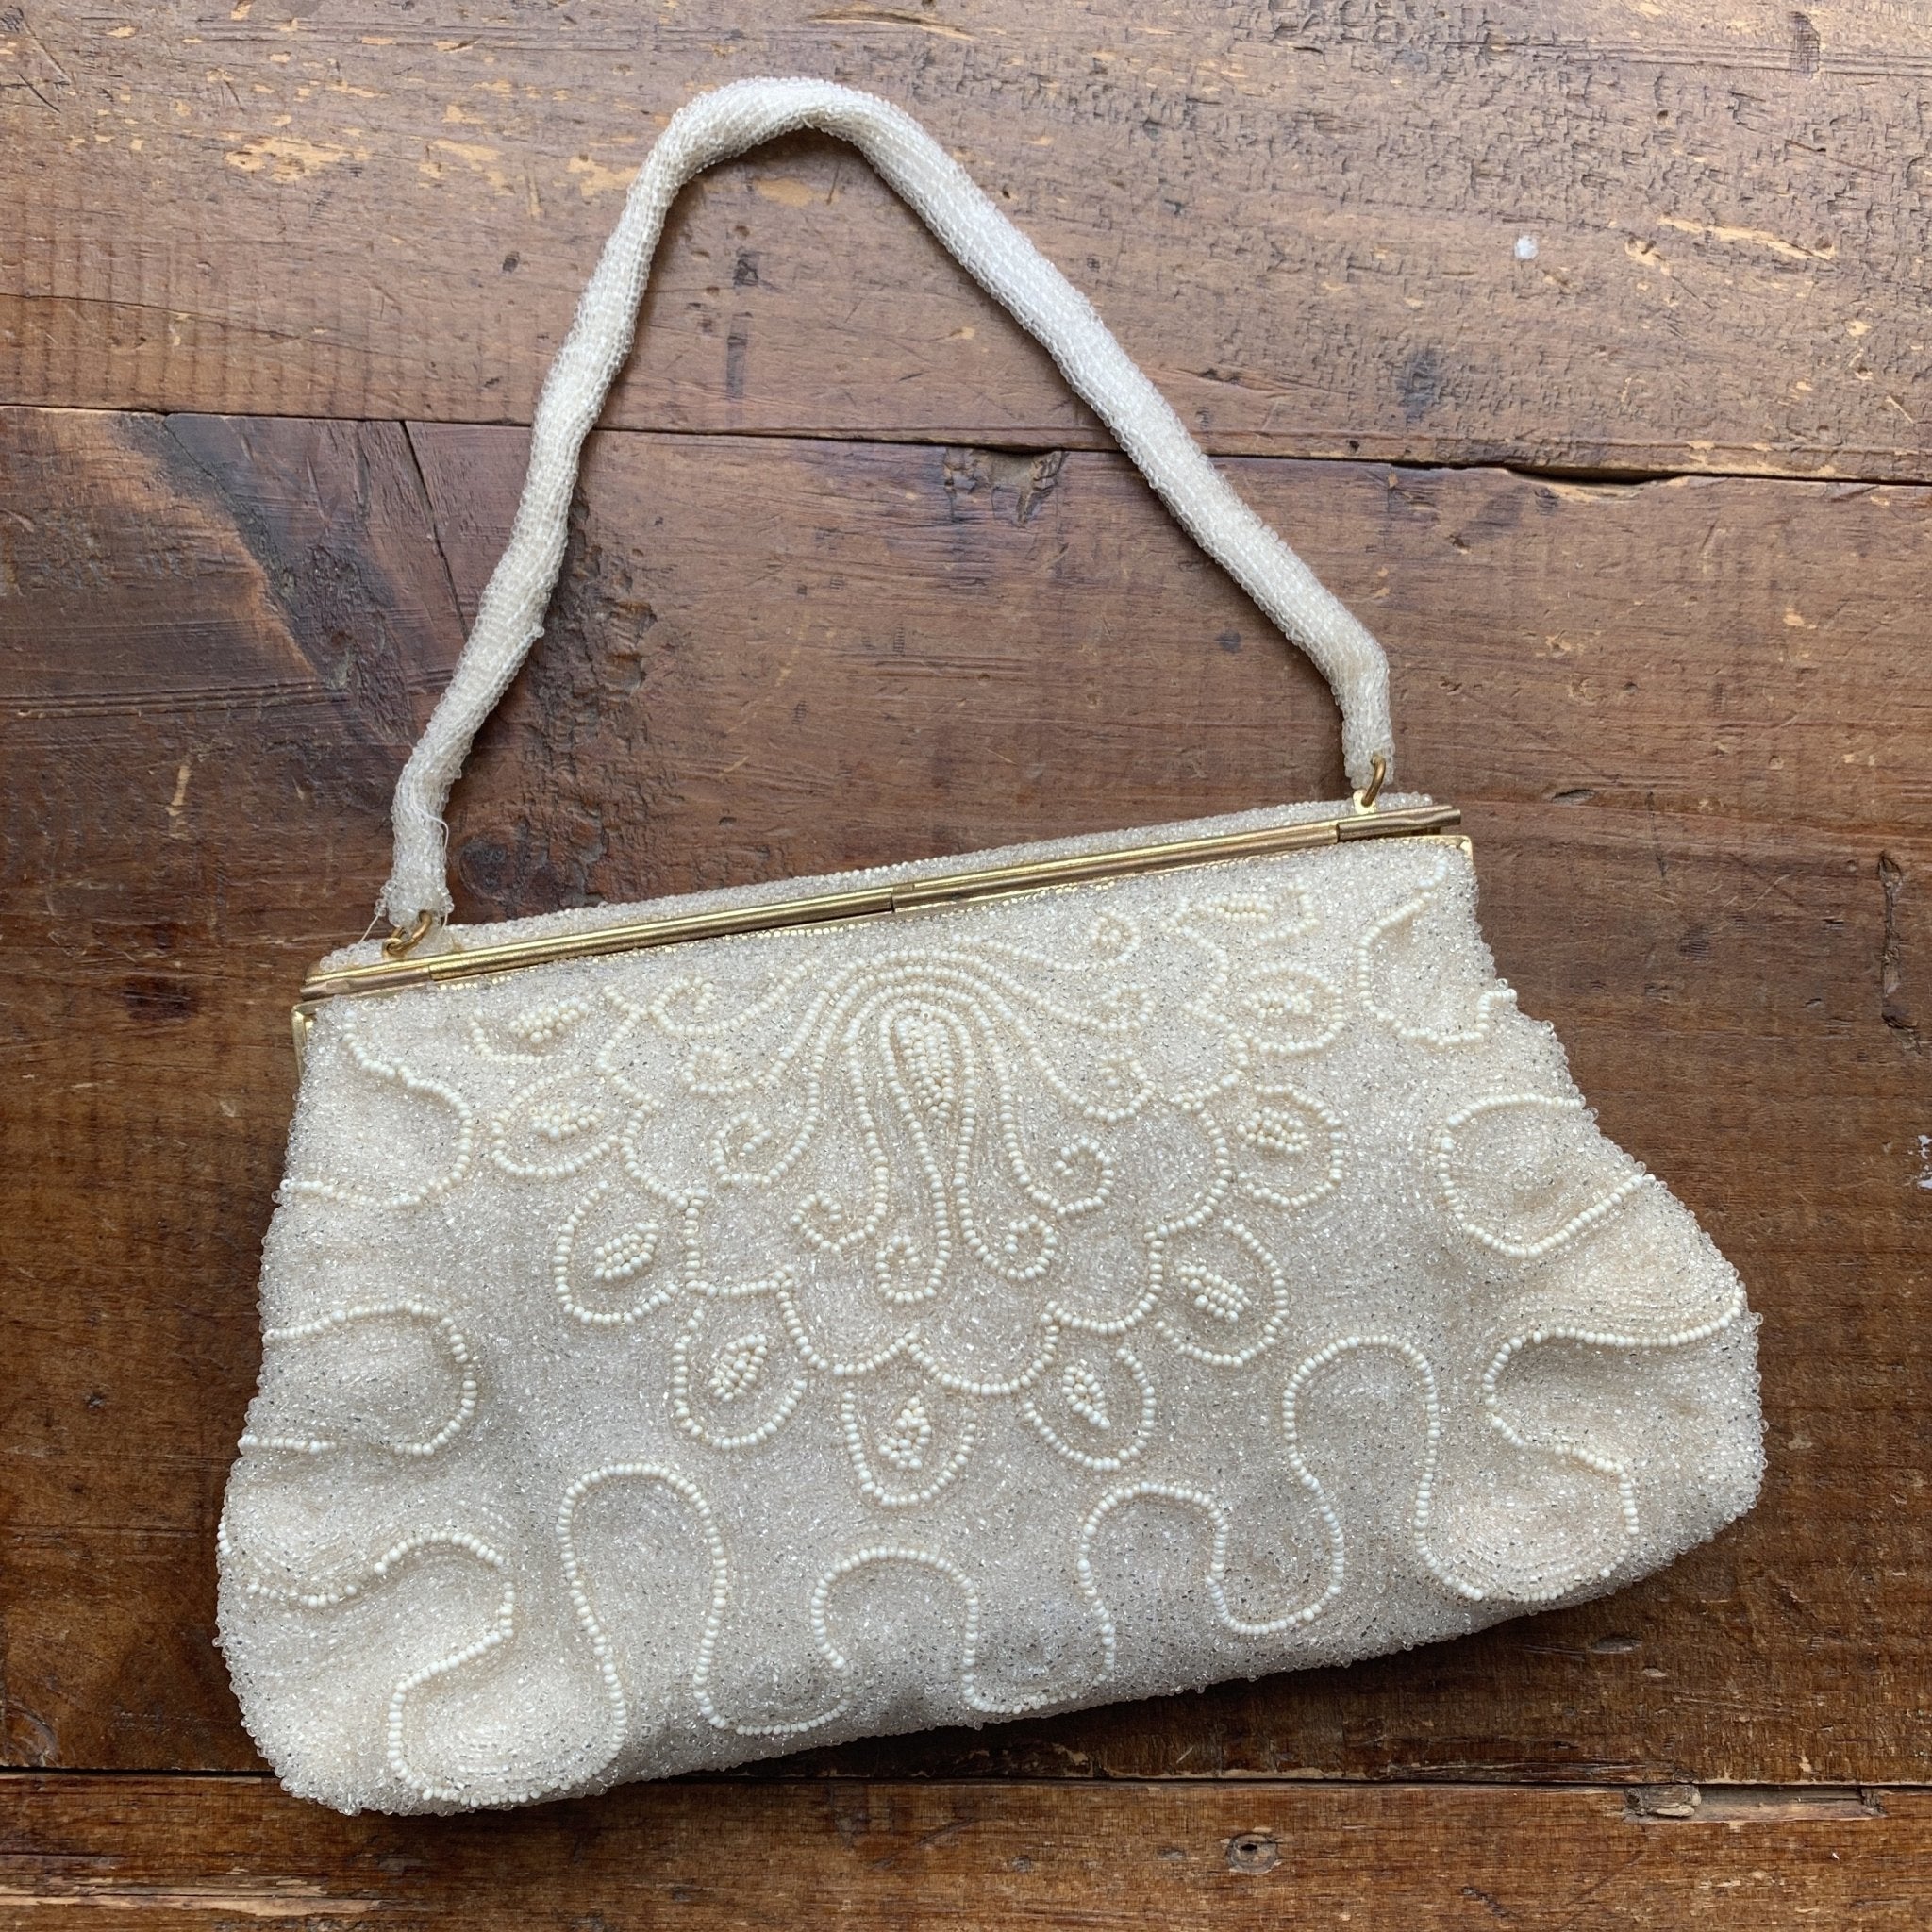 Vintage Cream Beaded Clutch from France. Formal Evening Bag. 1940s Sus